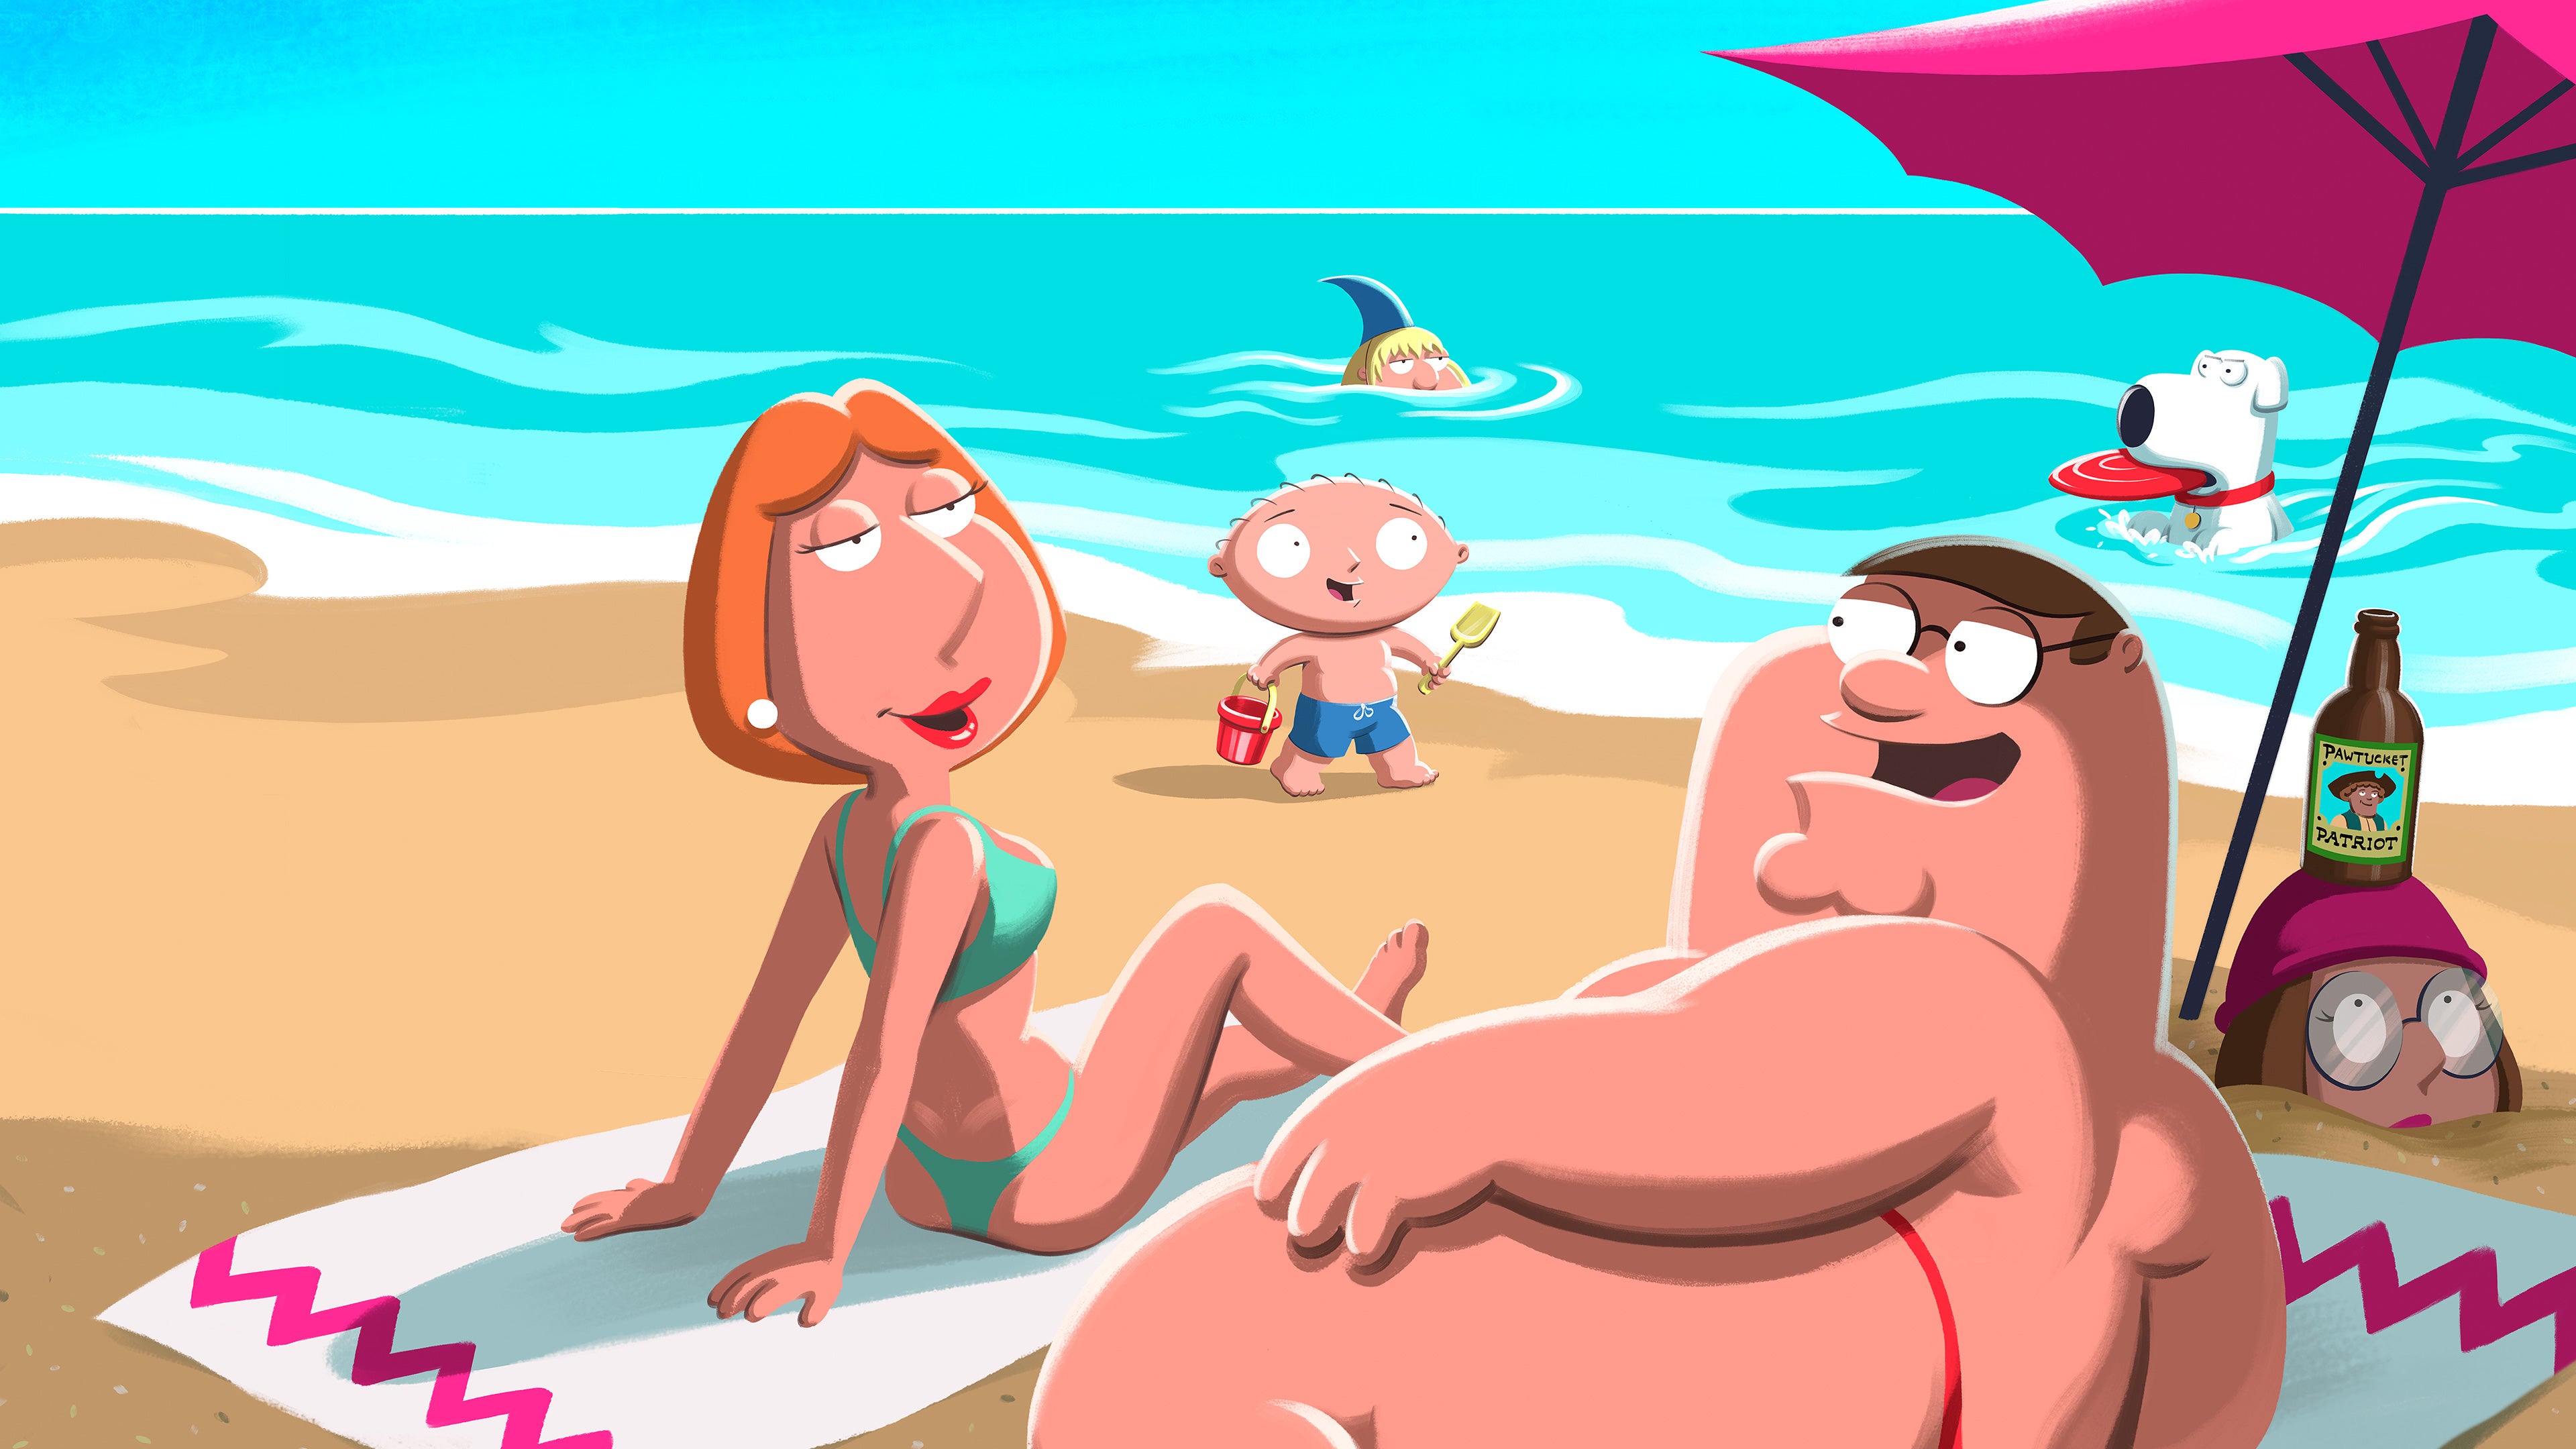 courtney edskes recommends lois and quagmire doing it pic